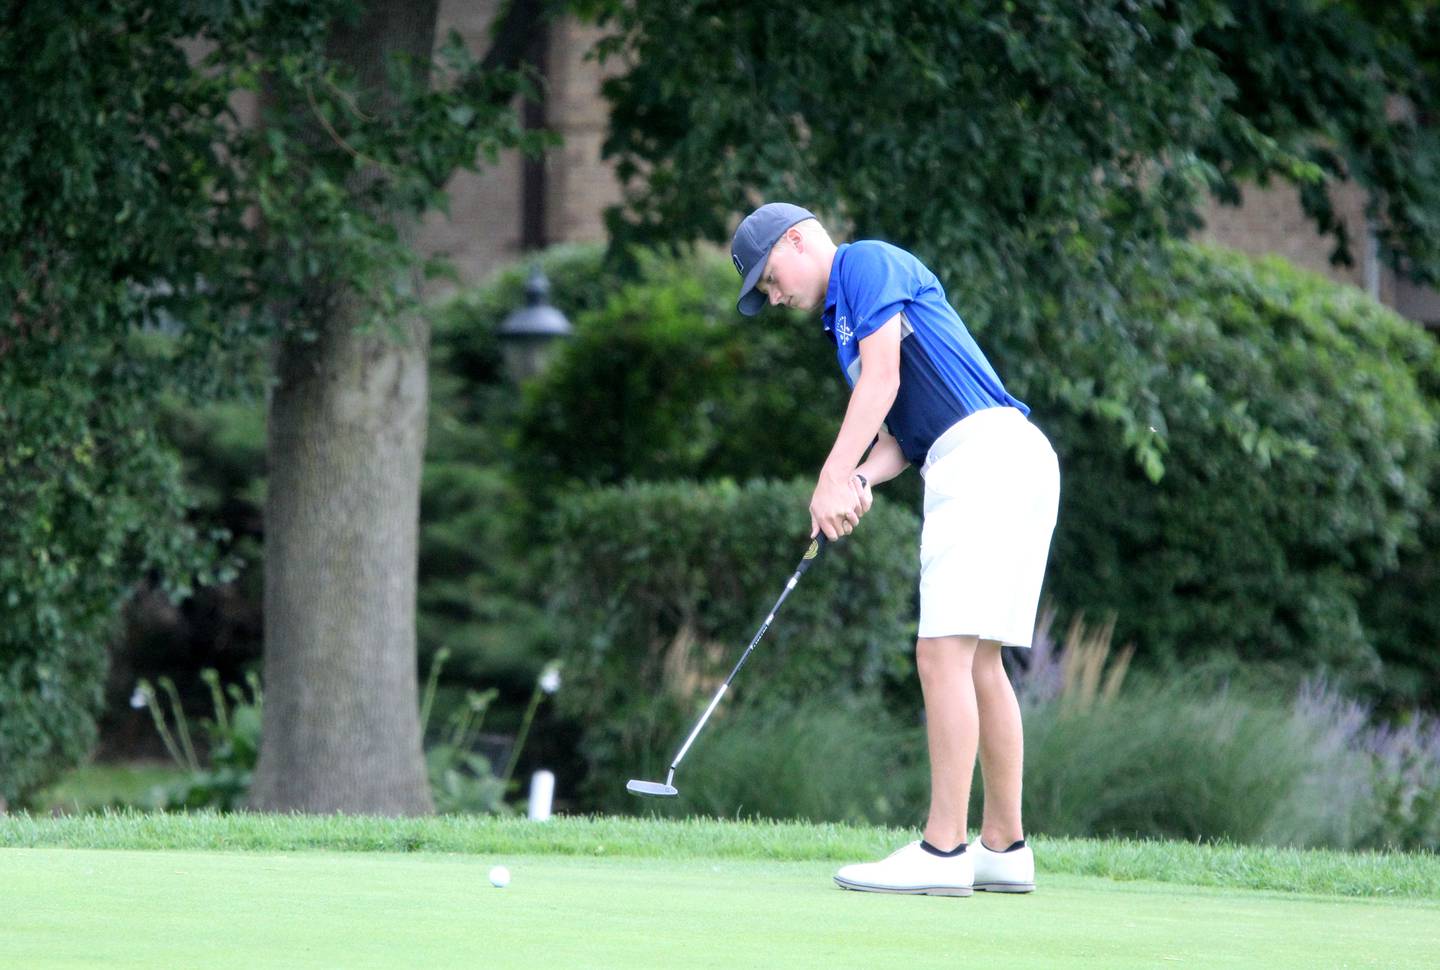 Geneva’s Austin Frick putts during the McChesney Cup golf tournament at the Geneva Golf Club on Monday, Aug. 15, 2022.